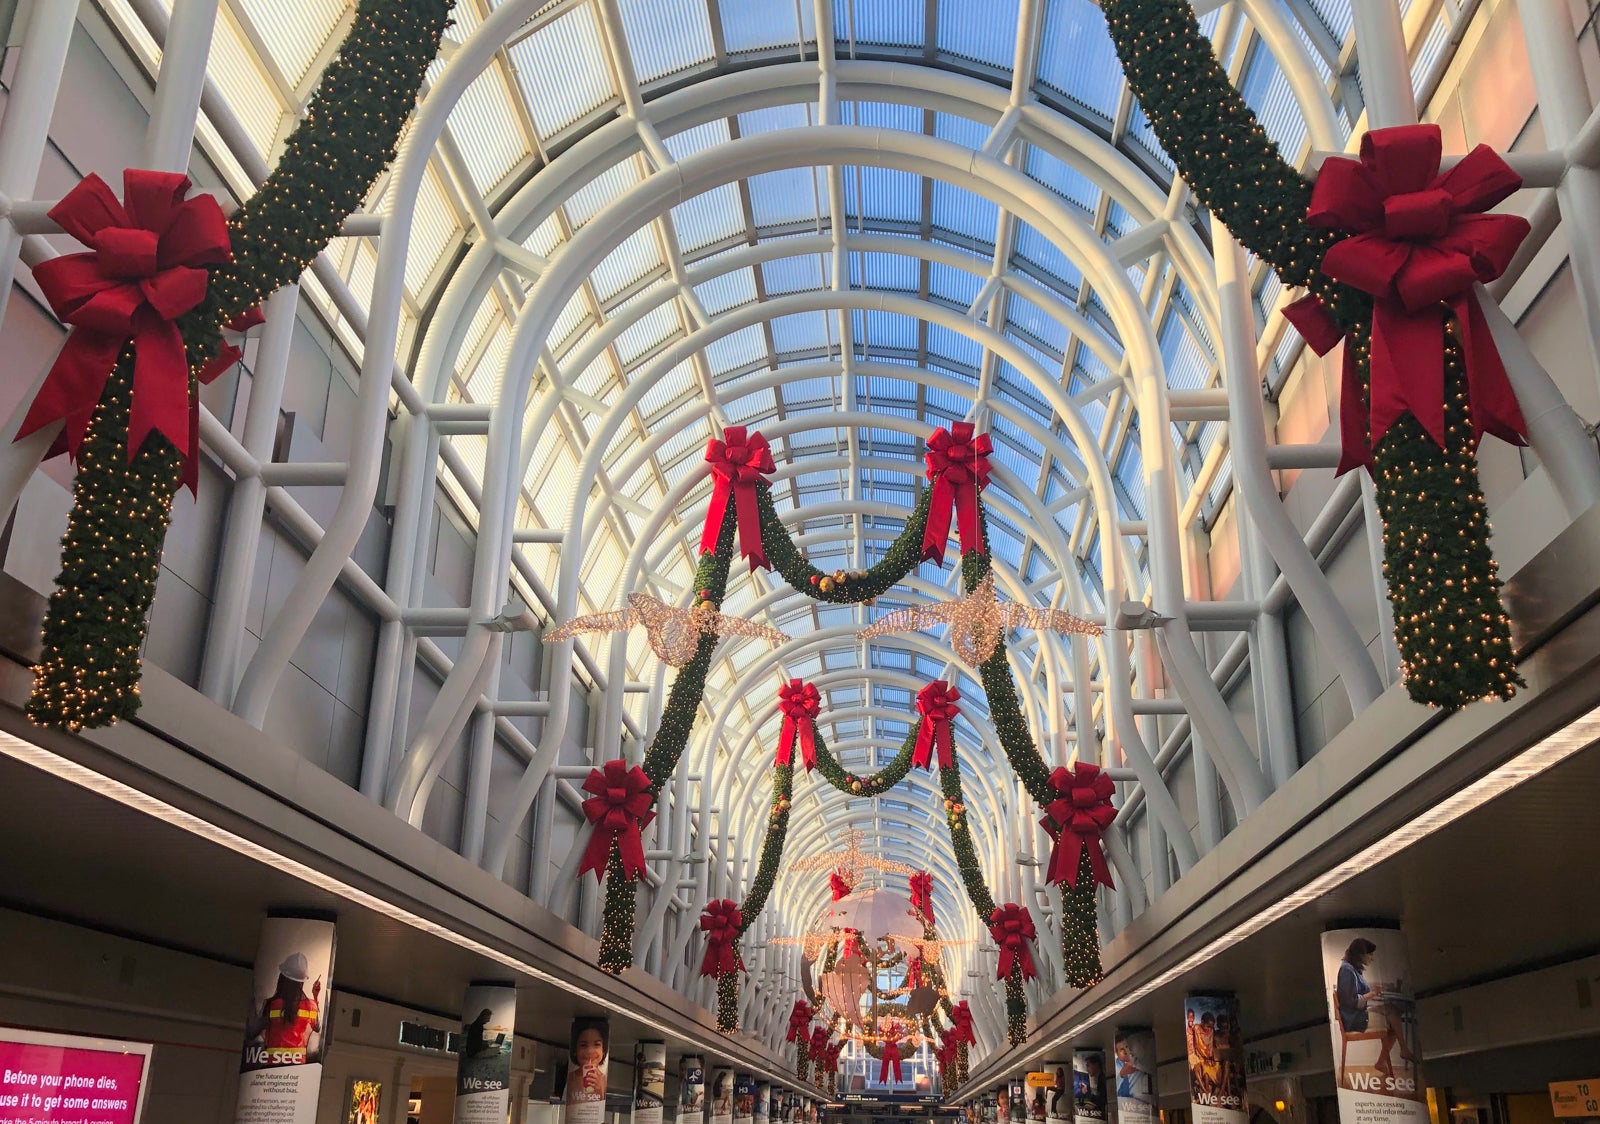 Ohare airport holiday decorations